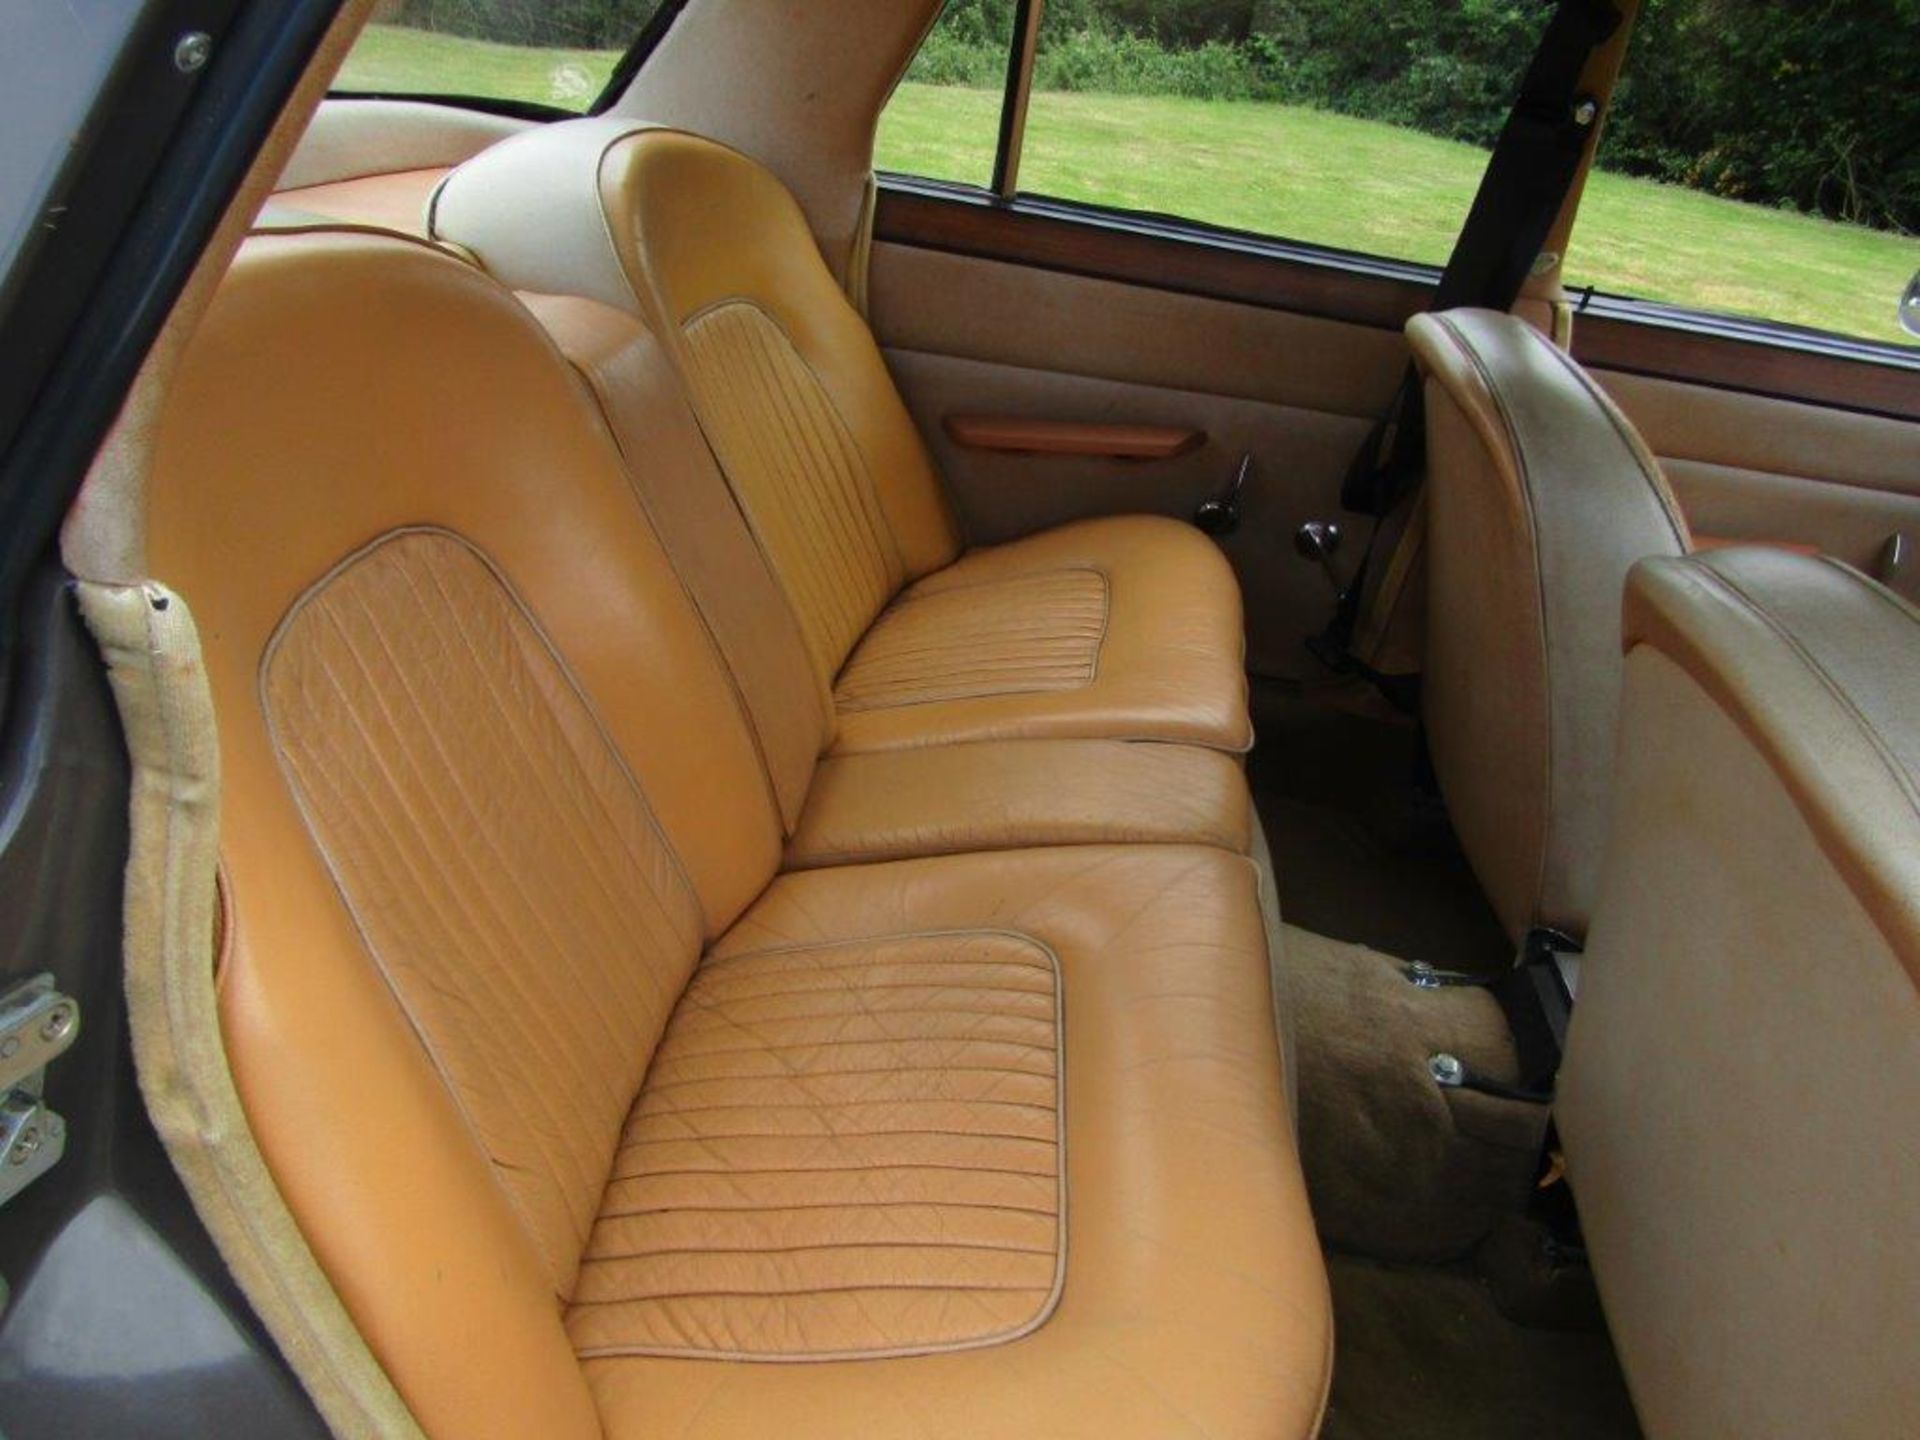 1970 Rover P6 2000 - Image 3 of 9